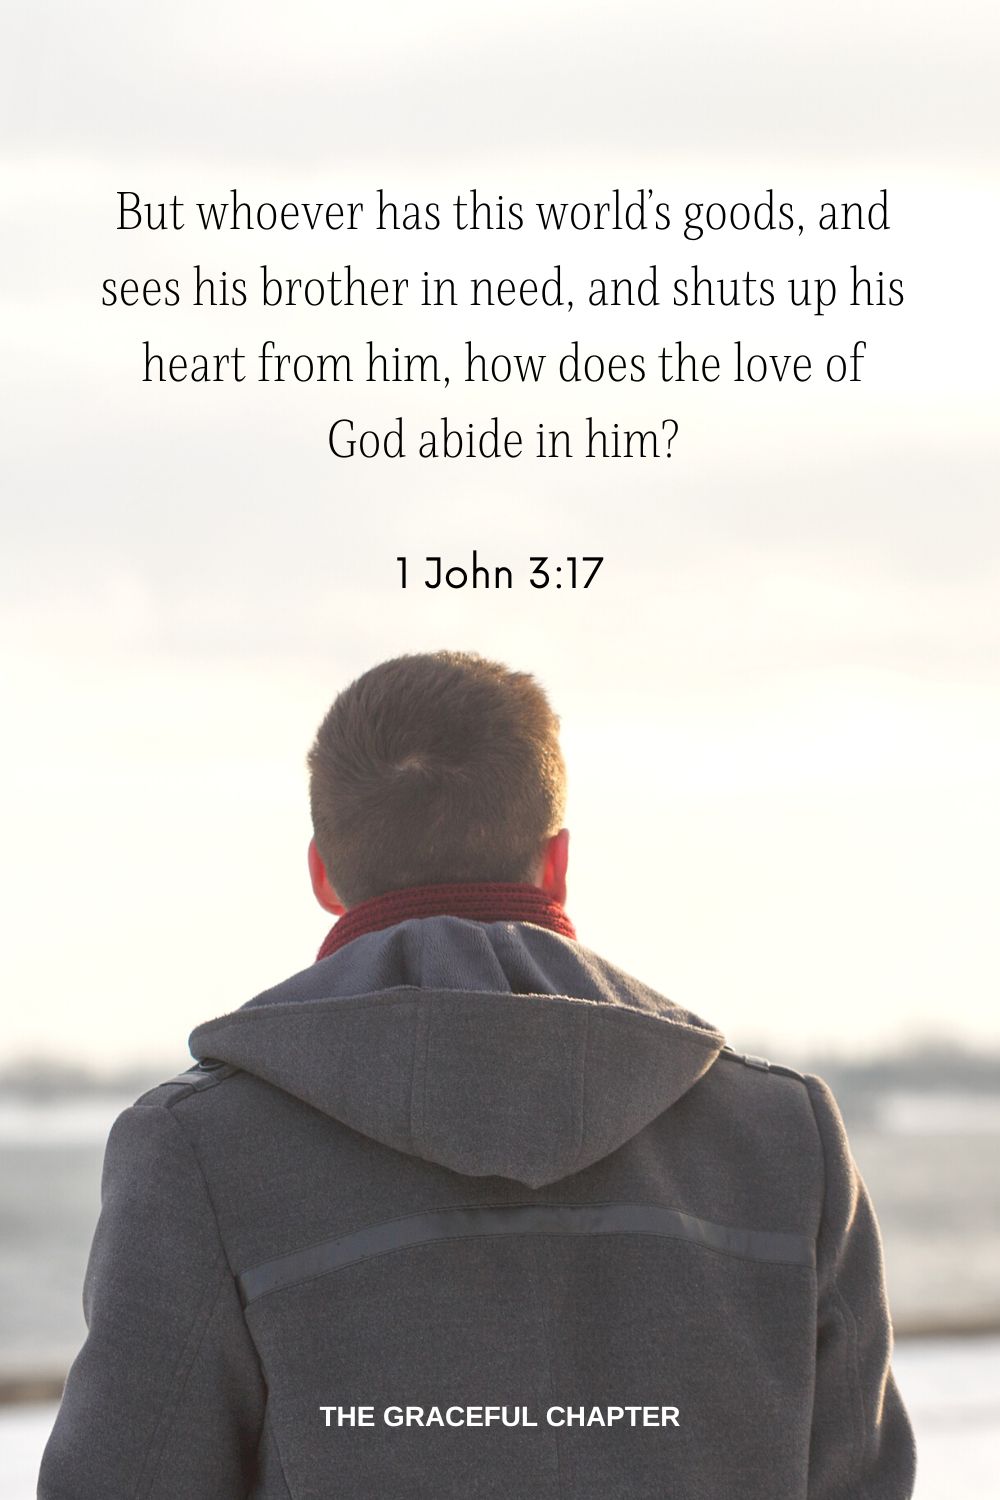 But whoever has this world’s goods, and sees his brother in need, and shuts up his heart from him, how does the love of God abide in him? 1 John 3:17